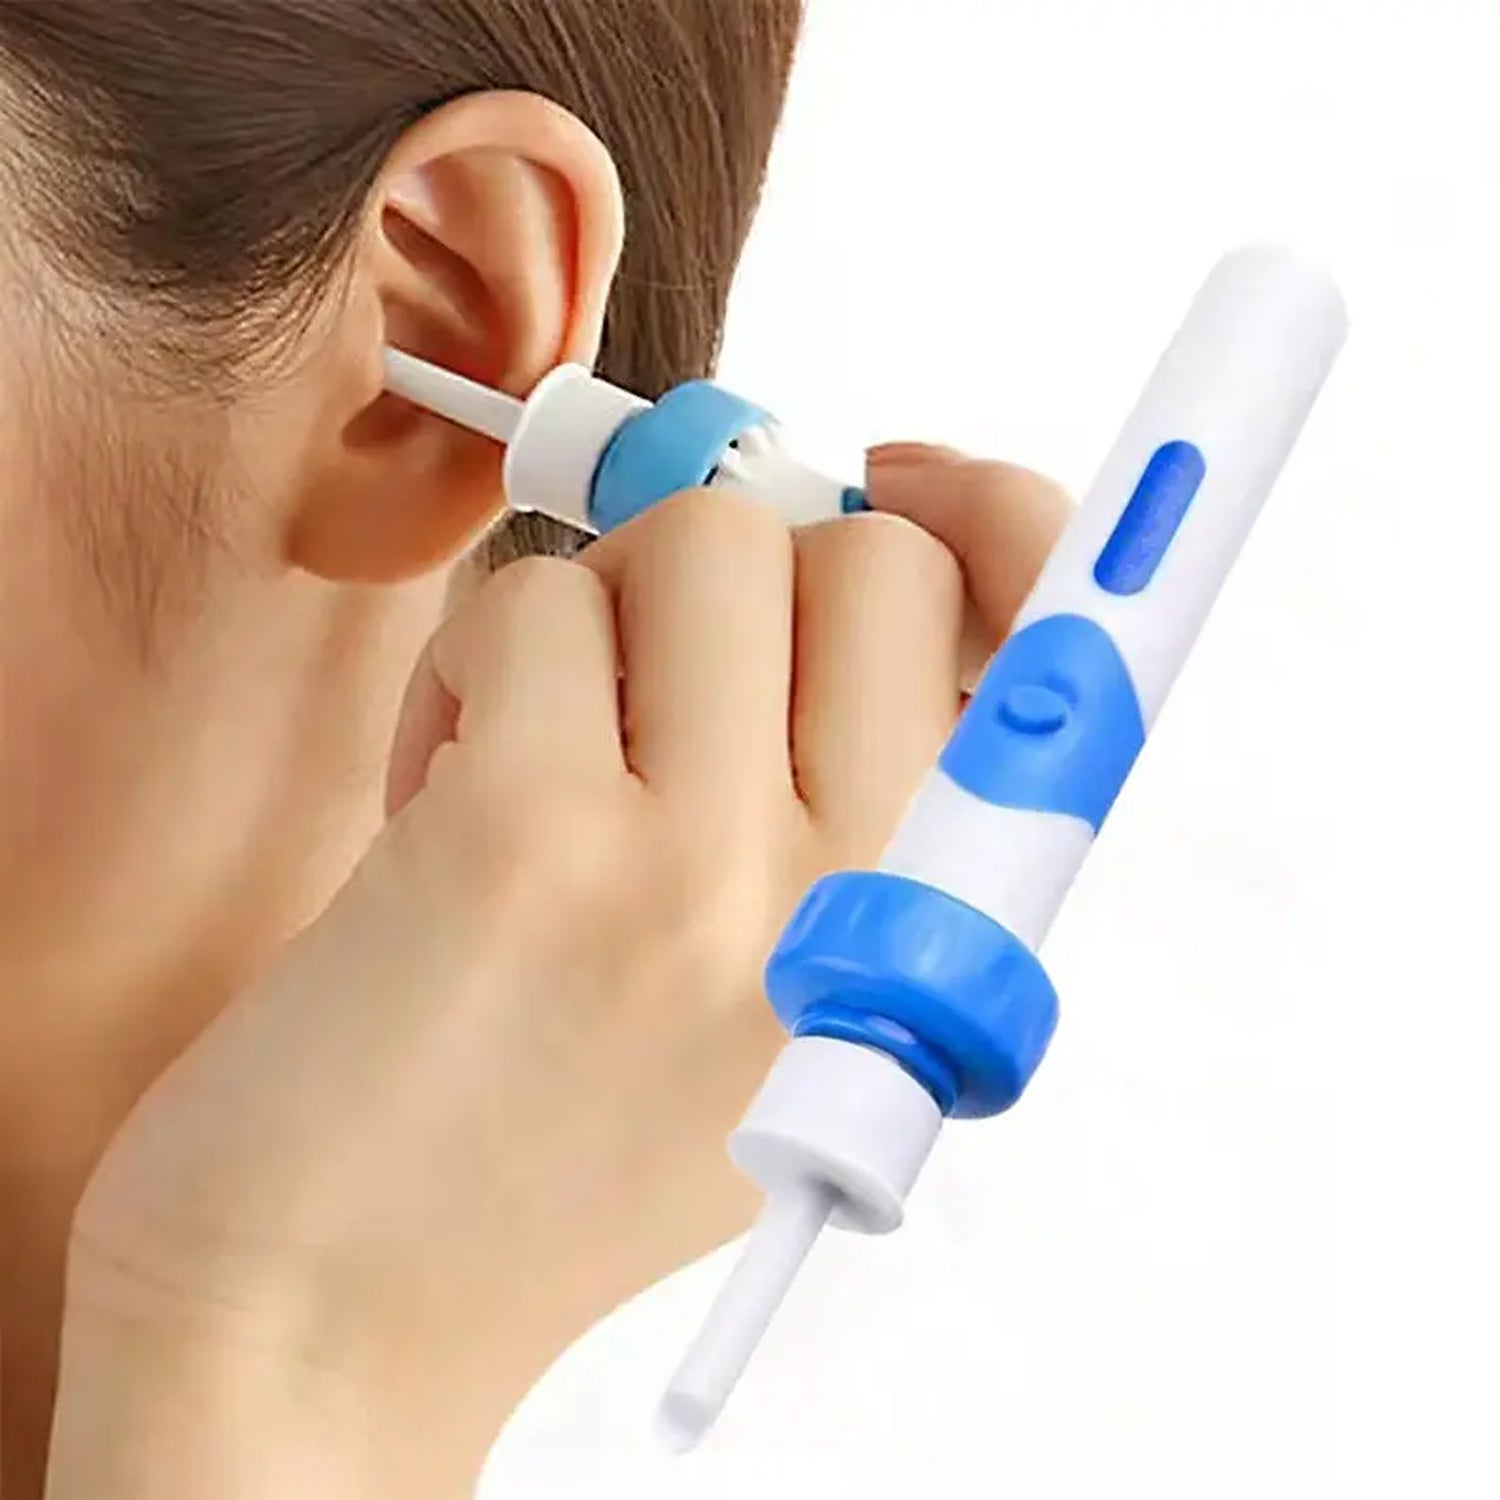 6374 Ear Suction Device, Portable Comfortable Efficient Automatic Electric Vacuum Soft Ear Pick Ear Cleaner Easy Earwax Remover Soft Prevent Ear-Pick Clean Tools Set for Adults Kids JK Trends